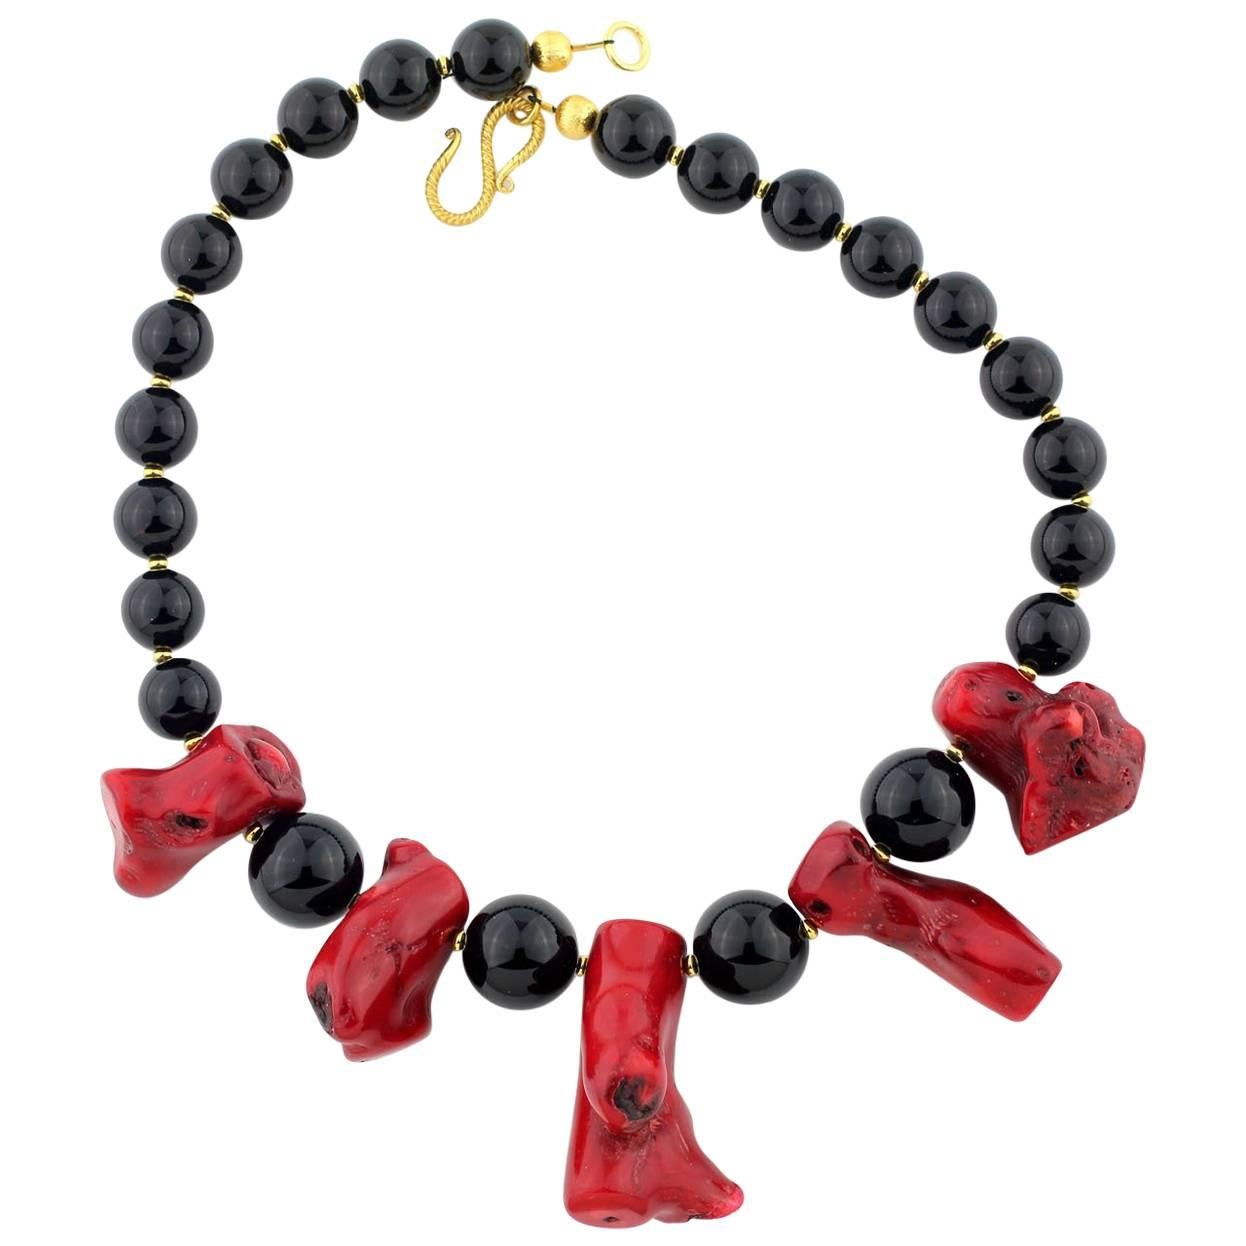 AJD Elegant Artistic Handmade Red Bamboo Coral & Black Onyx Necklace